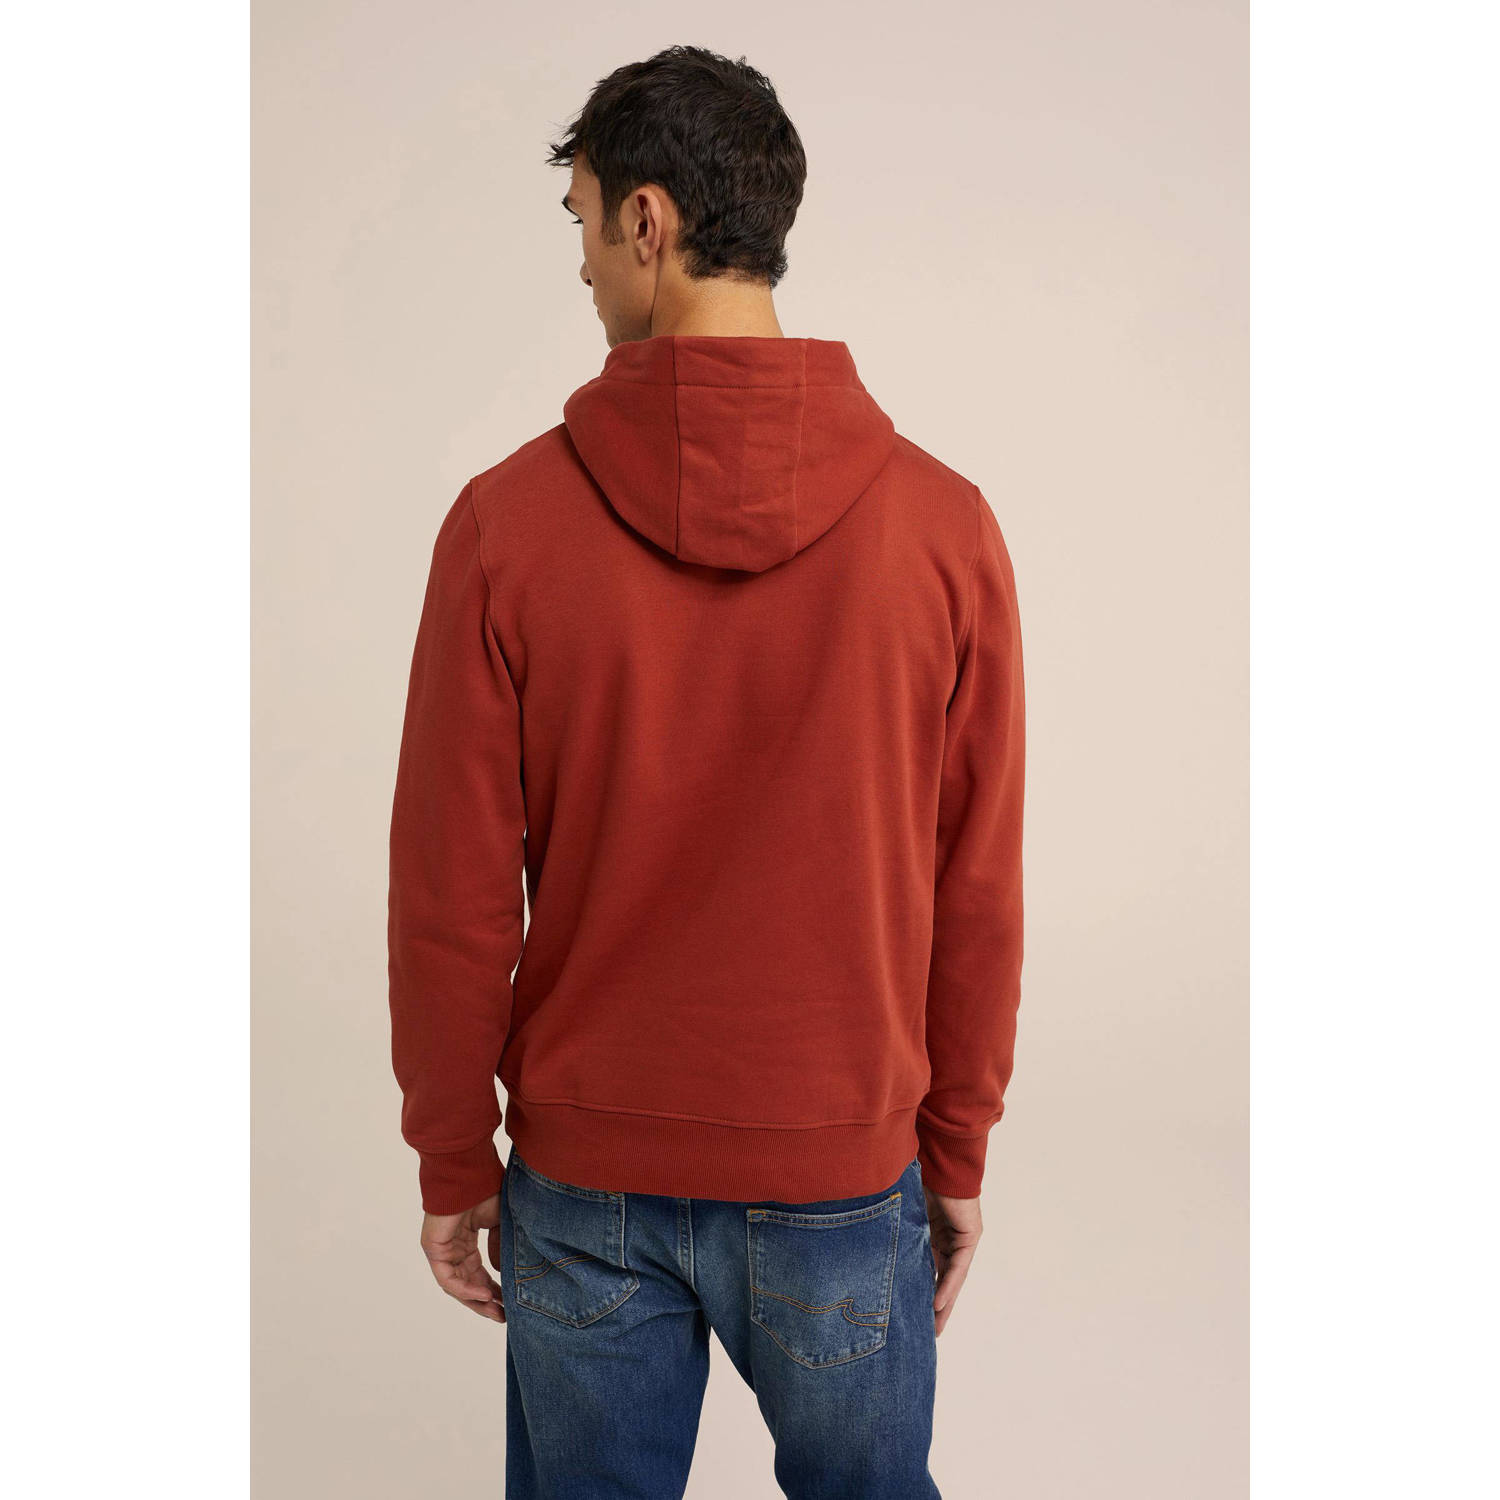 WE Fashion hoodie dusty red